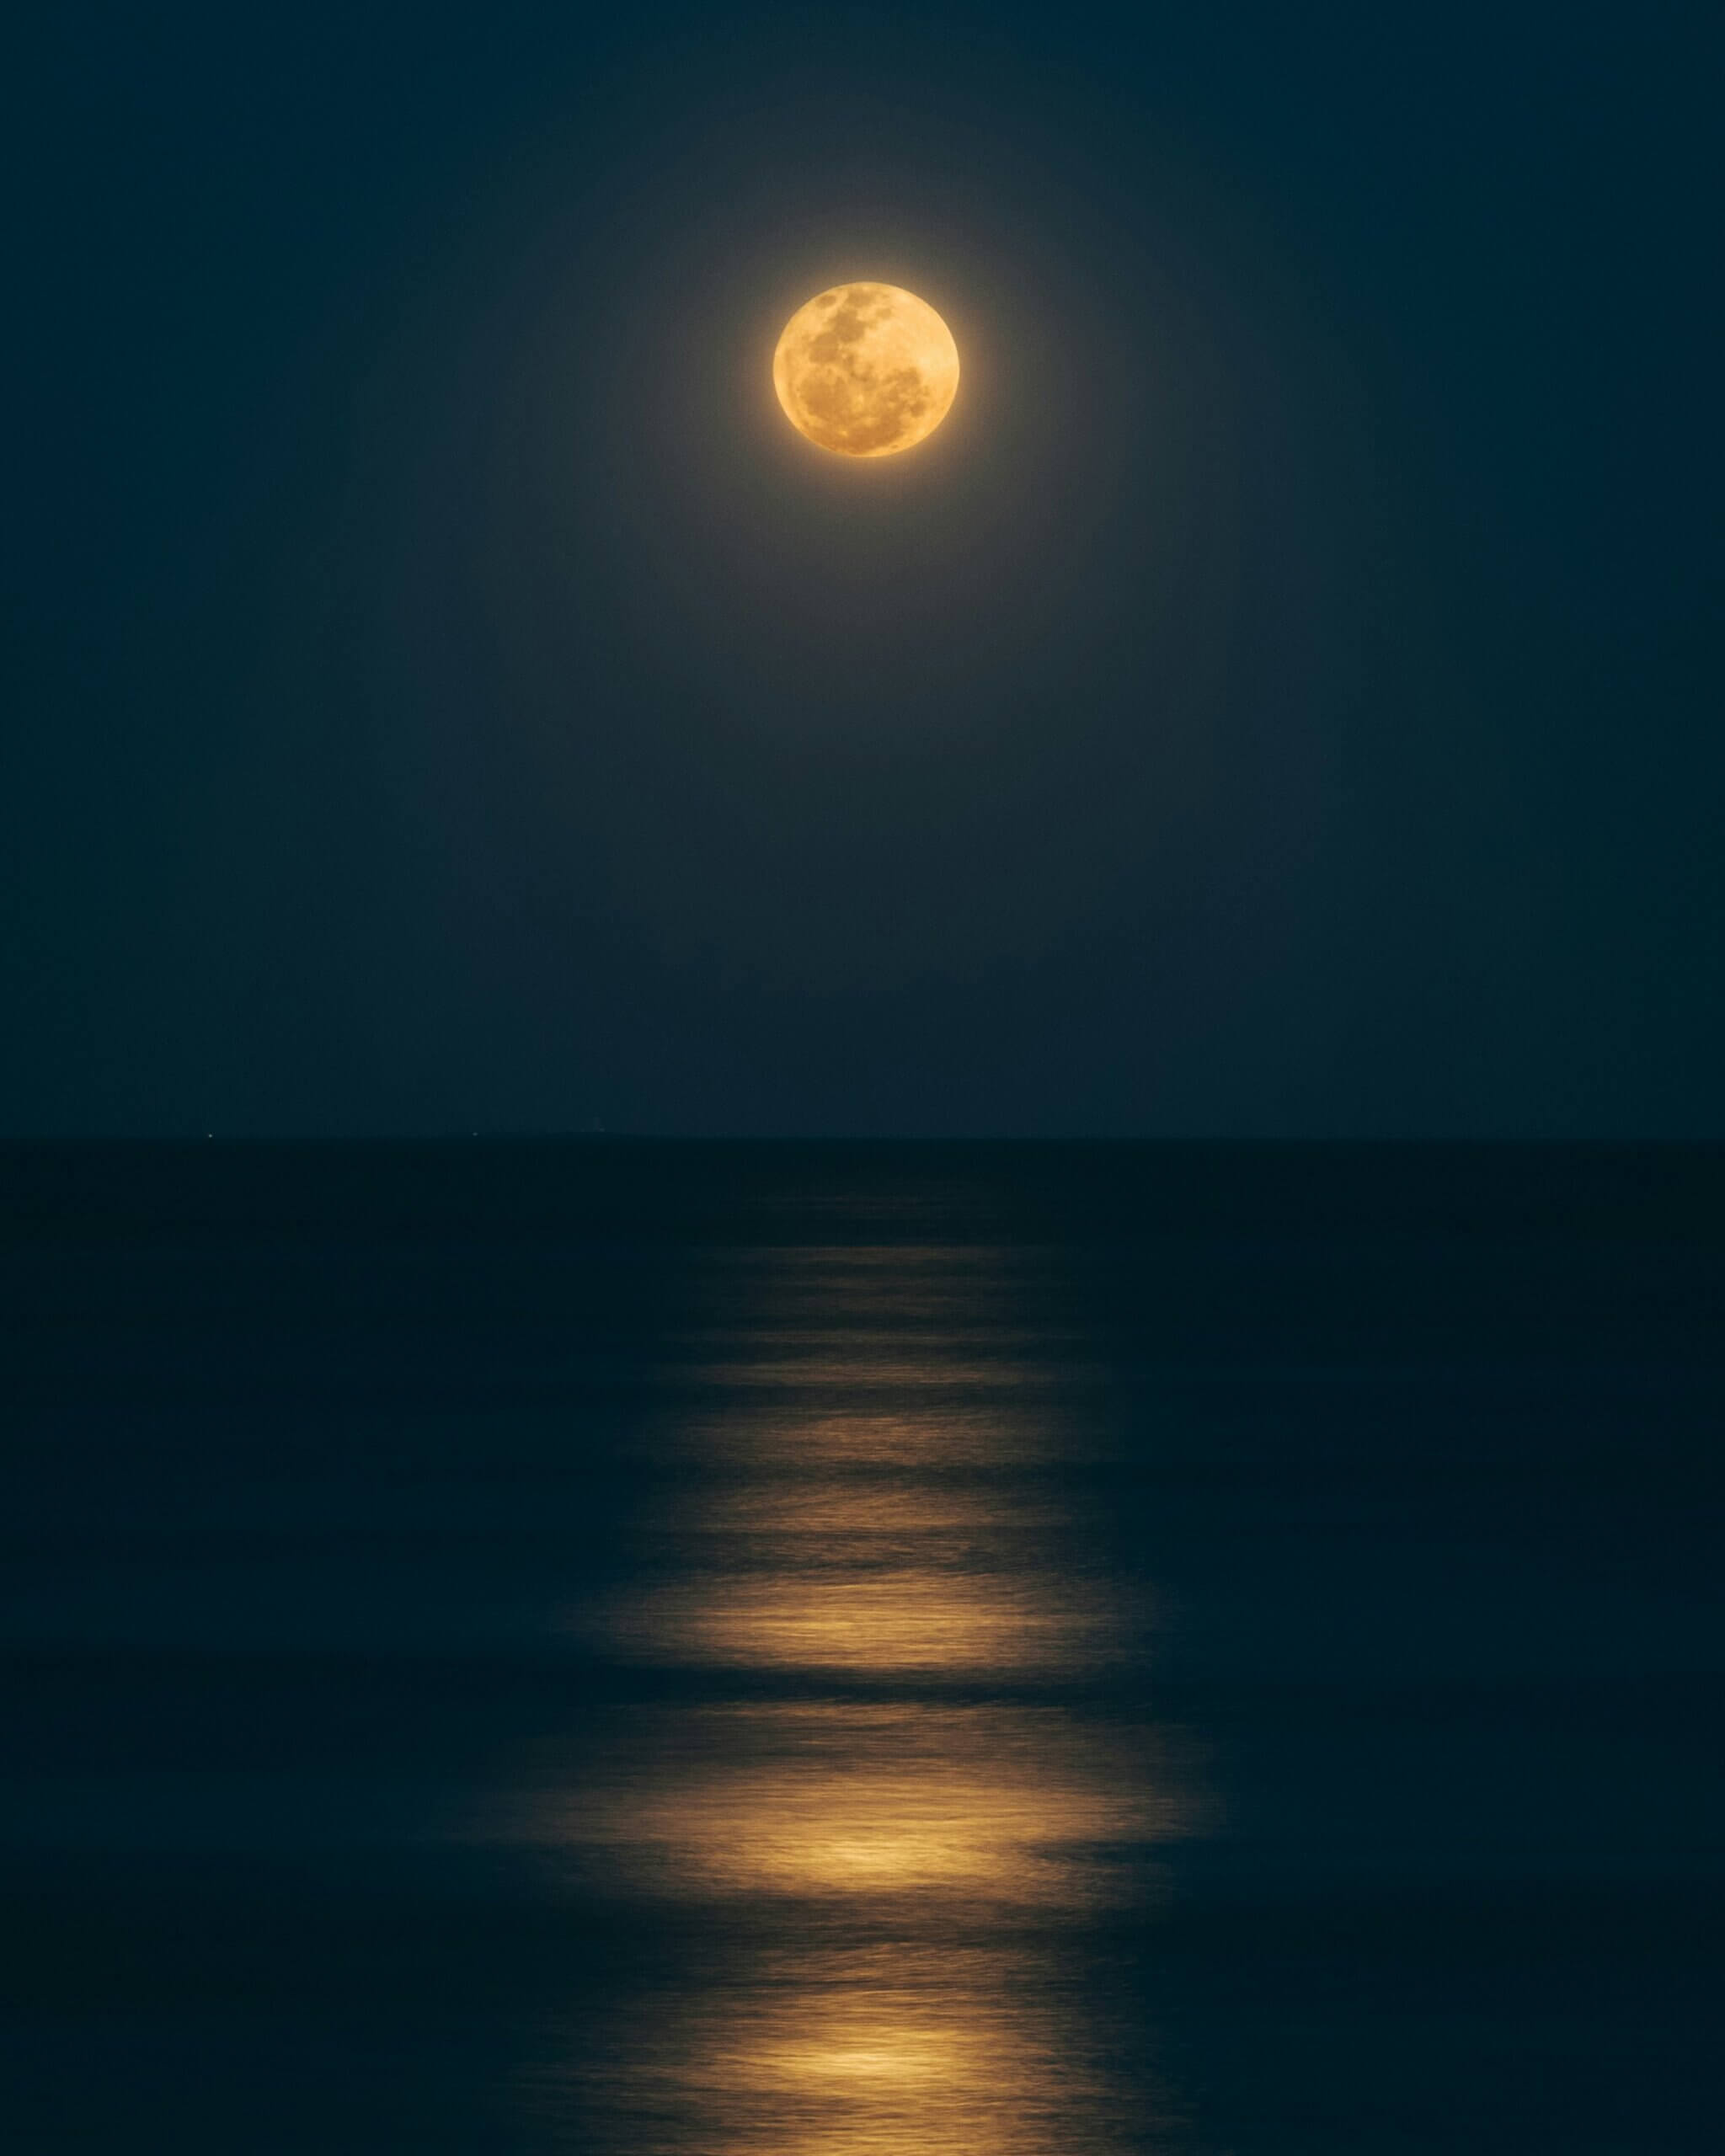 A full moon rising over a body of water